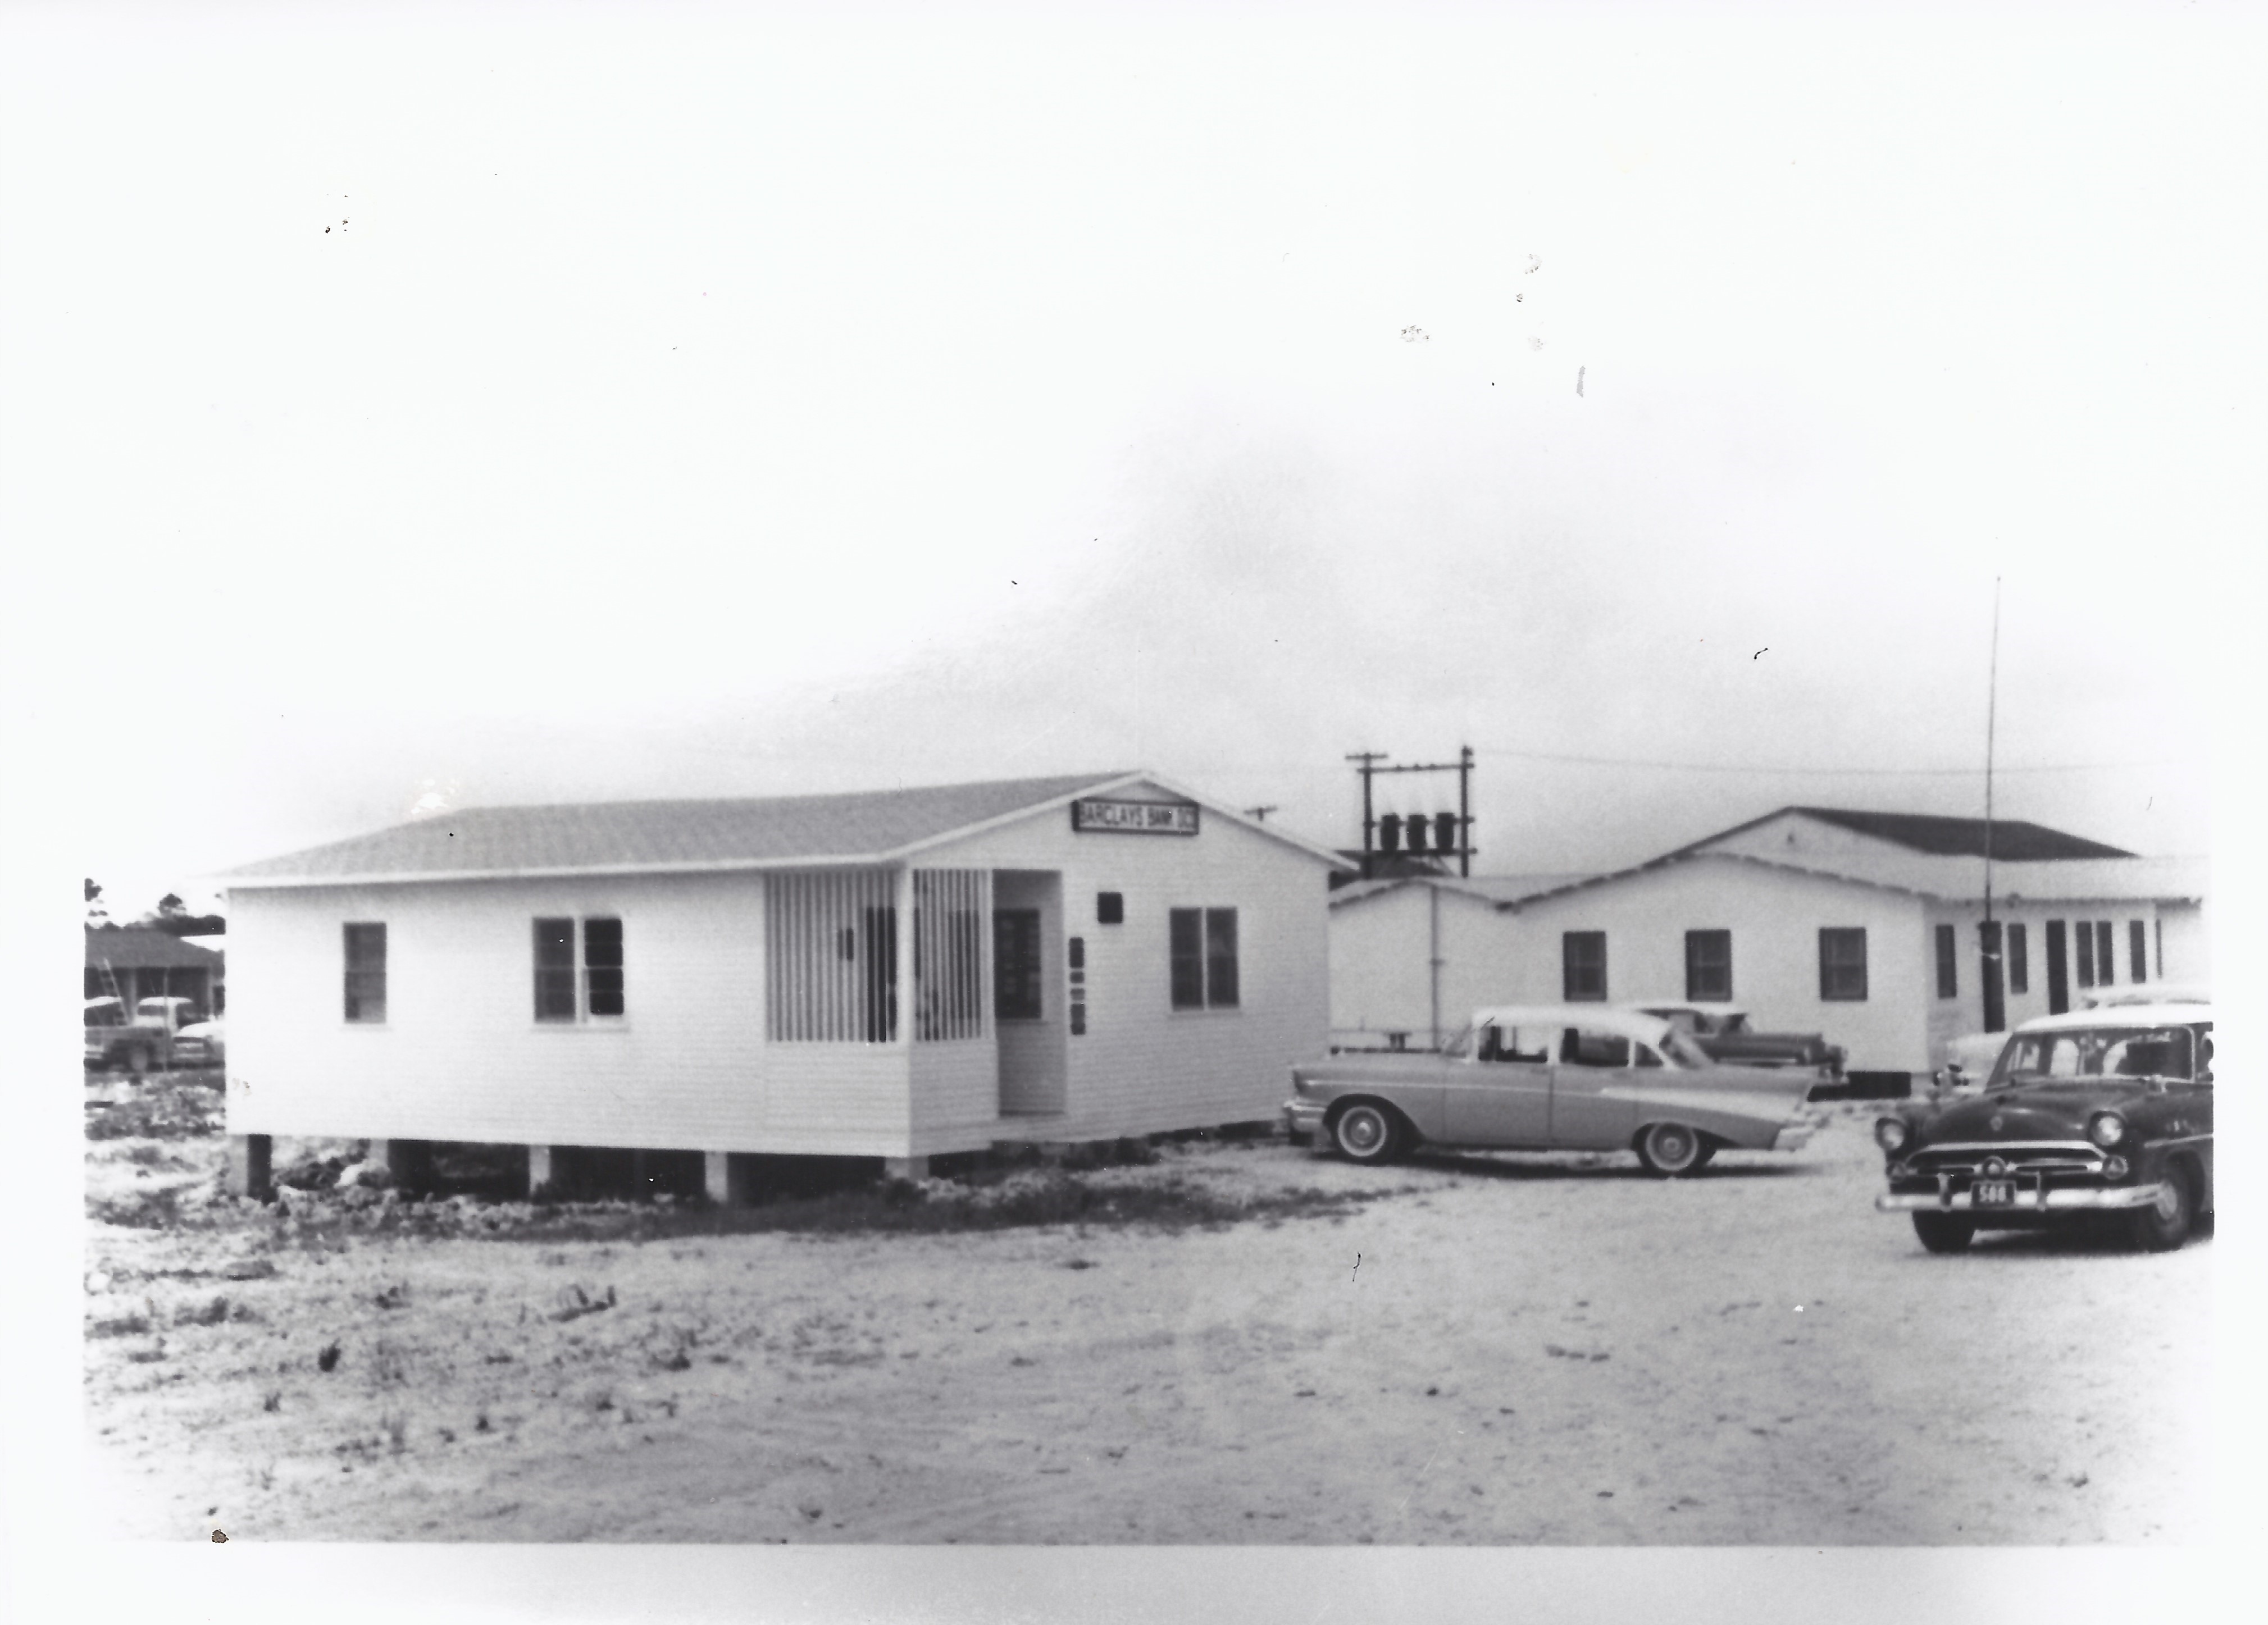 First Barclays Bank building in Freeport